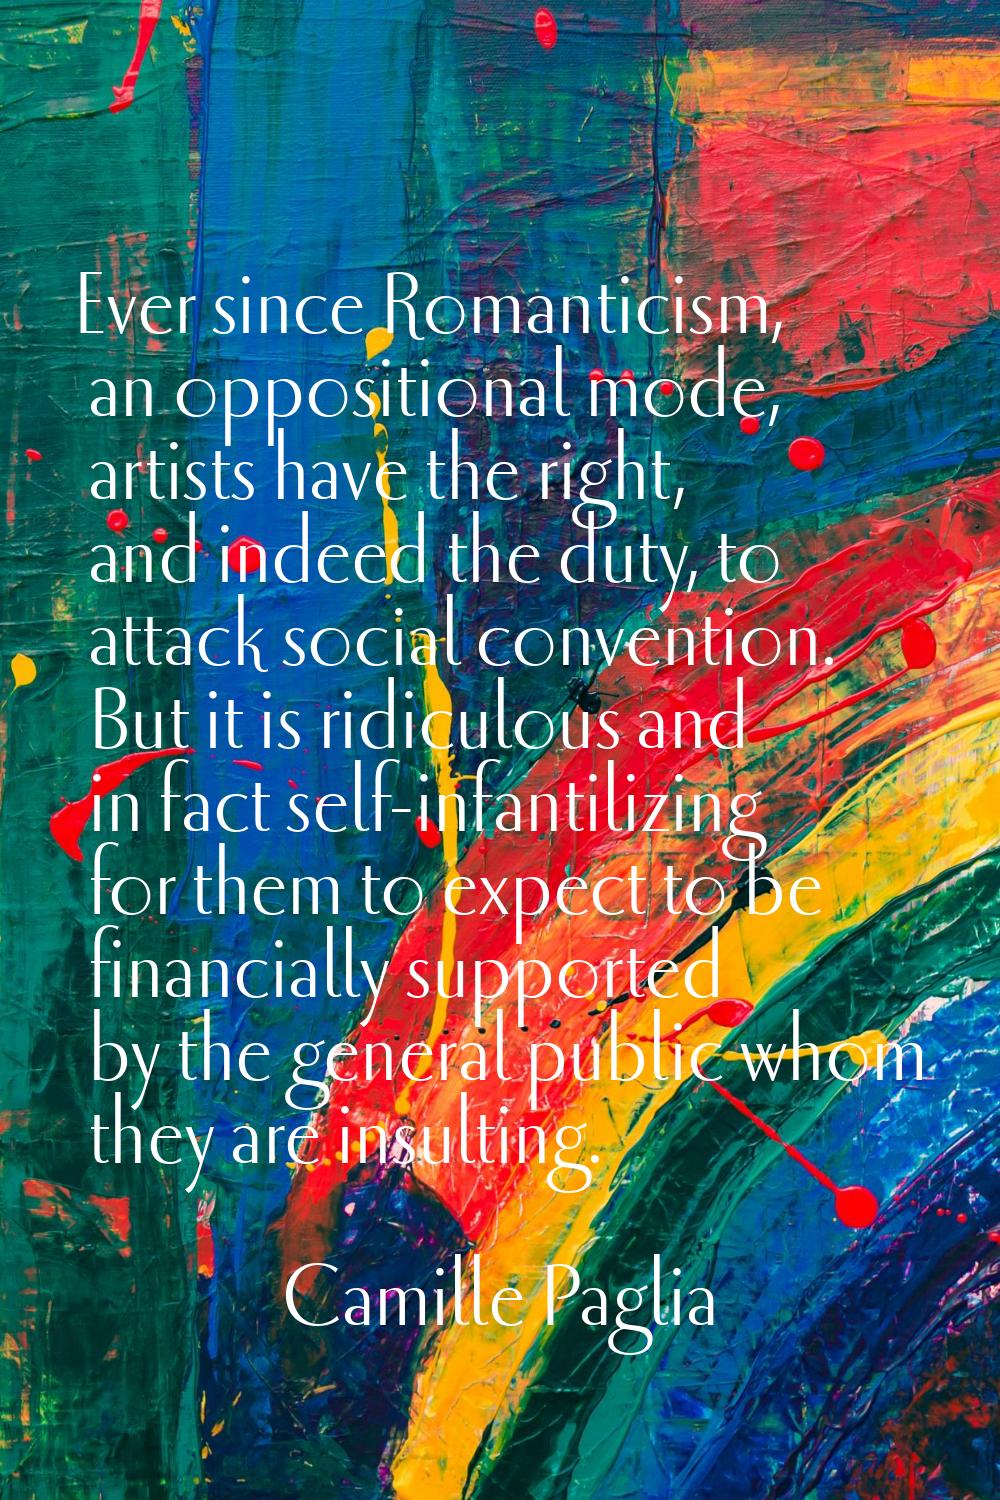 Ever since Romanticism, an oppositional mode, artists have the right, and indeed the duty, to attac